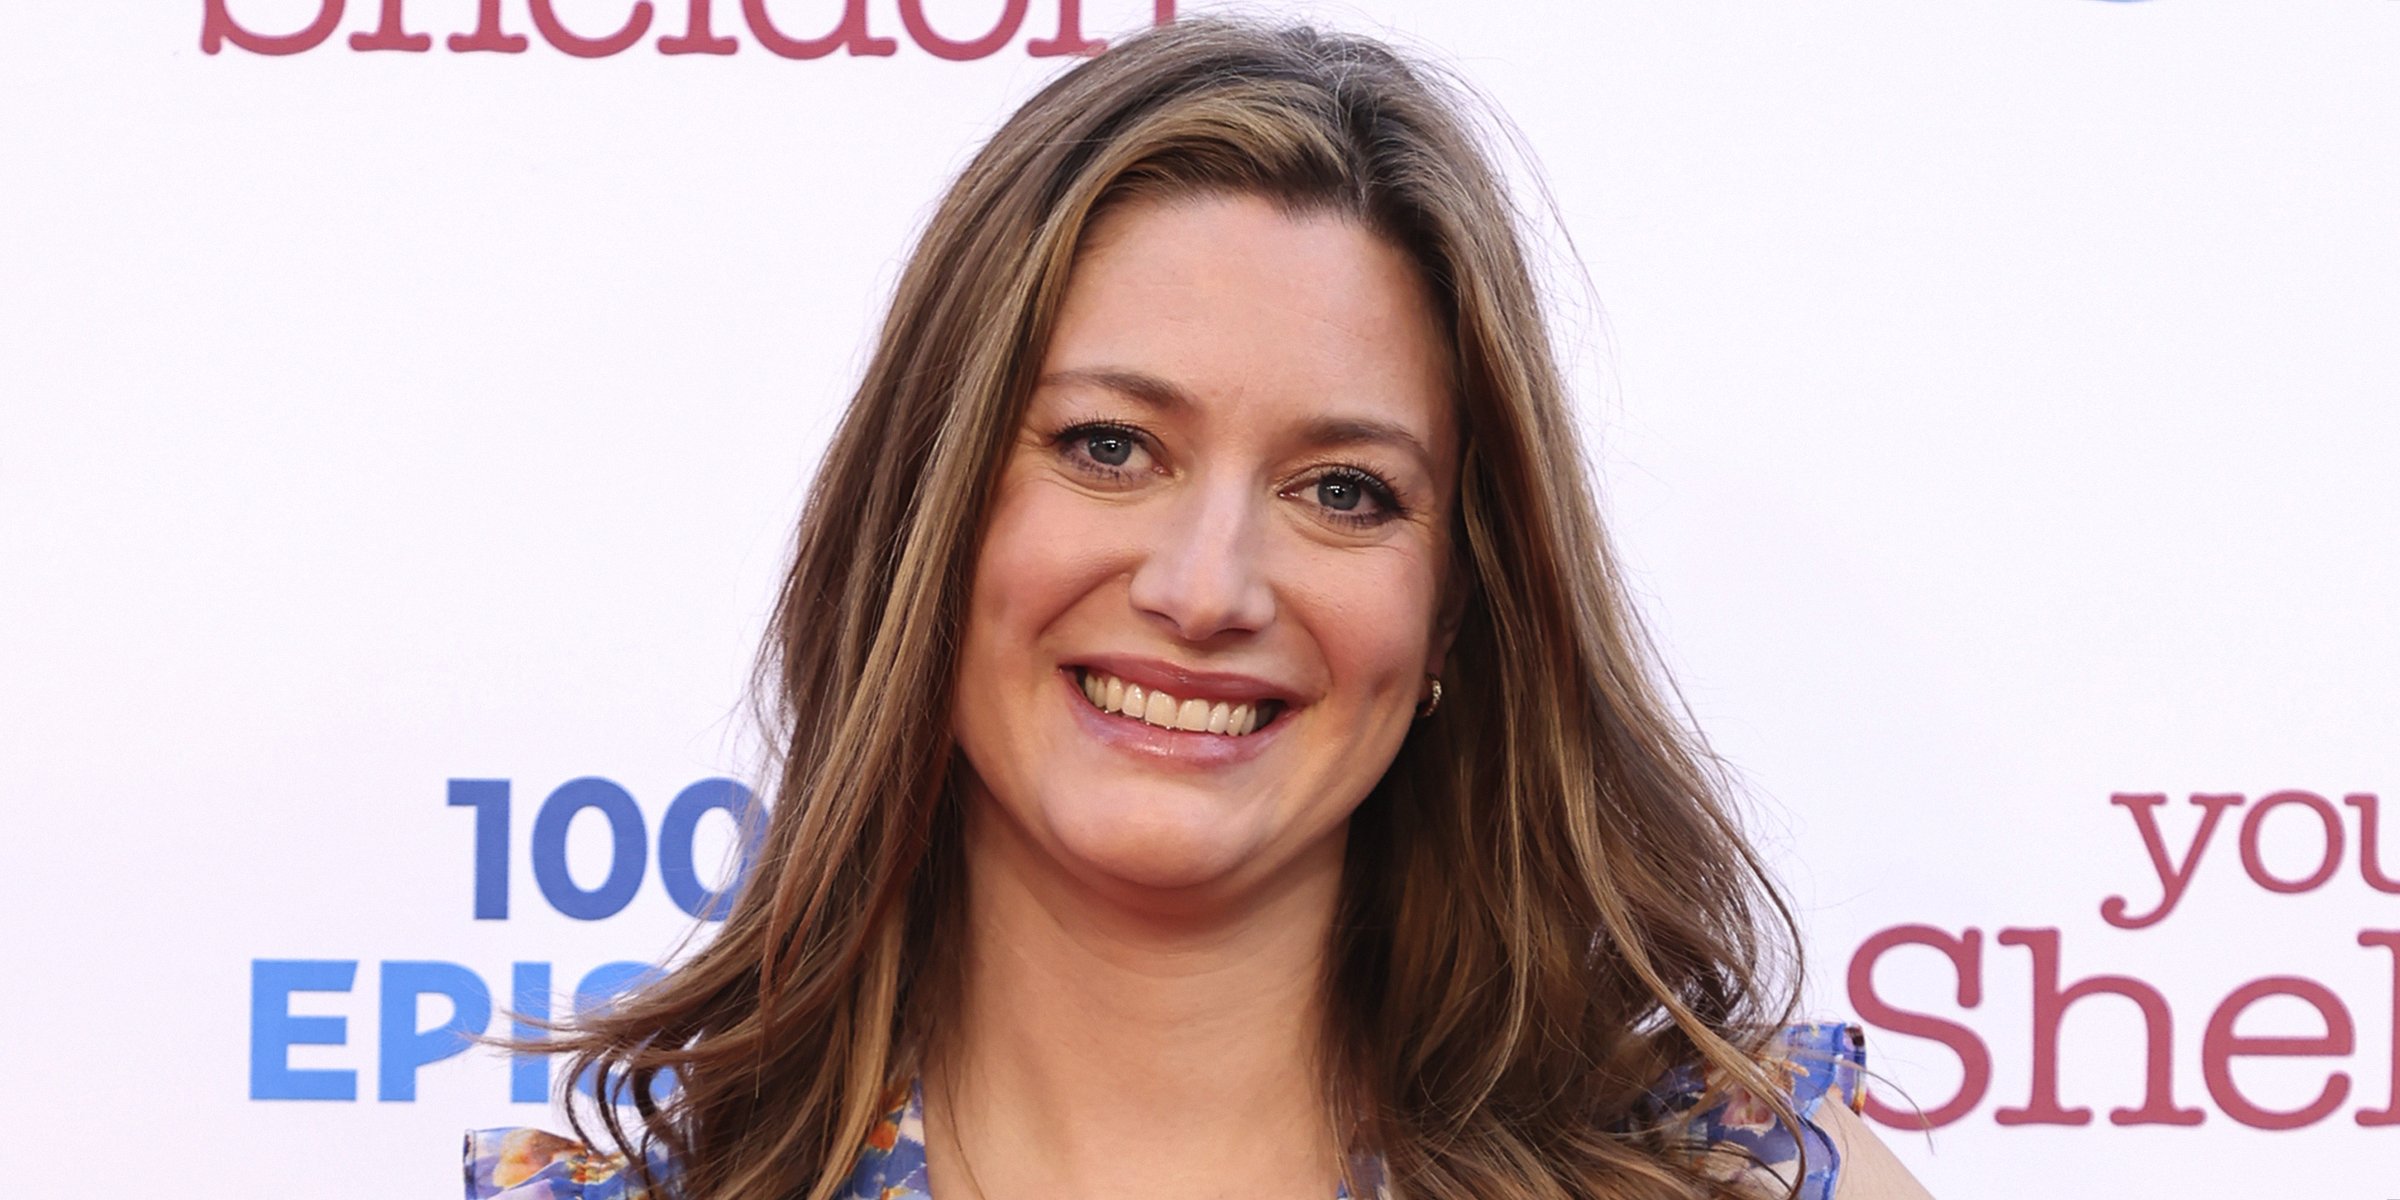 Does Zoe Perry Have a Husband? The Actress Is Secretive about Her Love Life